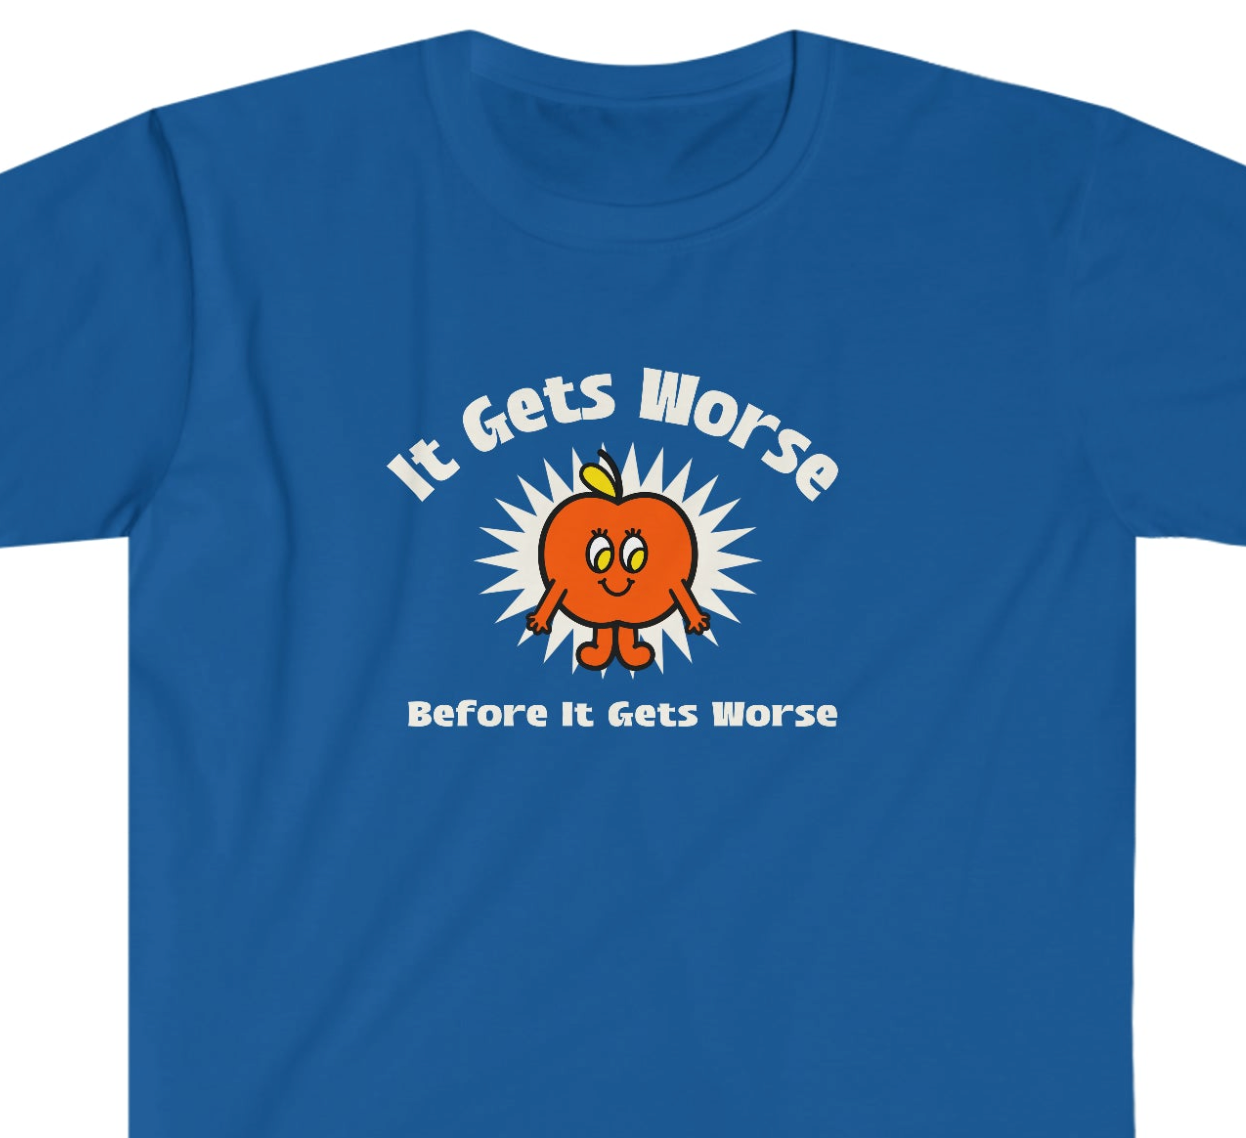 It Gets Worse Rewd Tees Unisex Softstyle T-Shirt